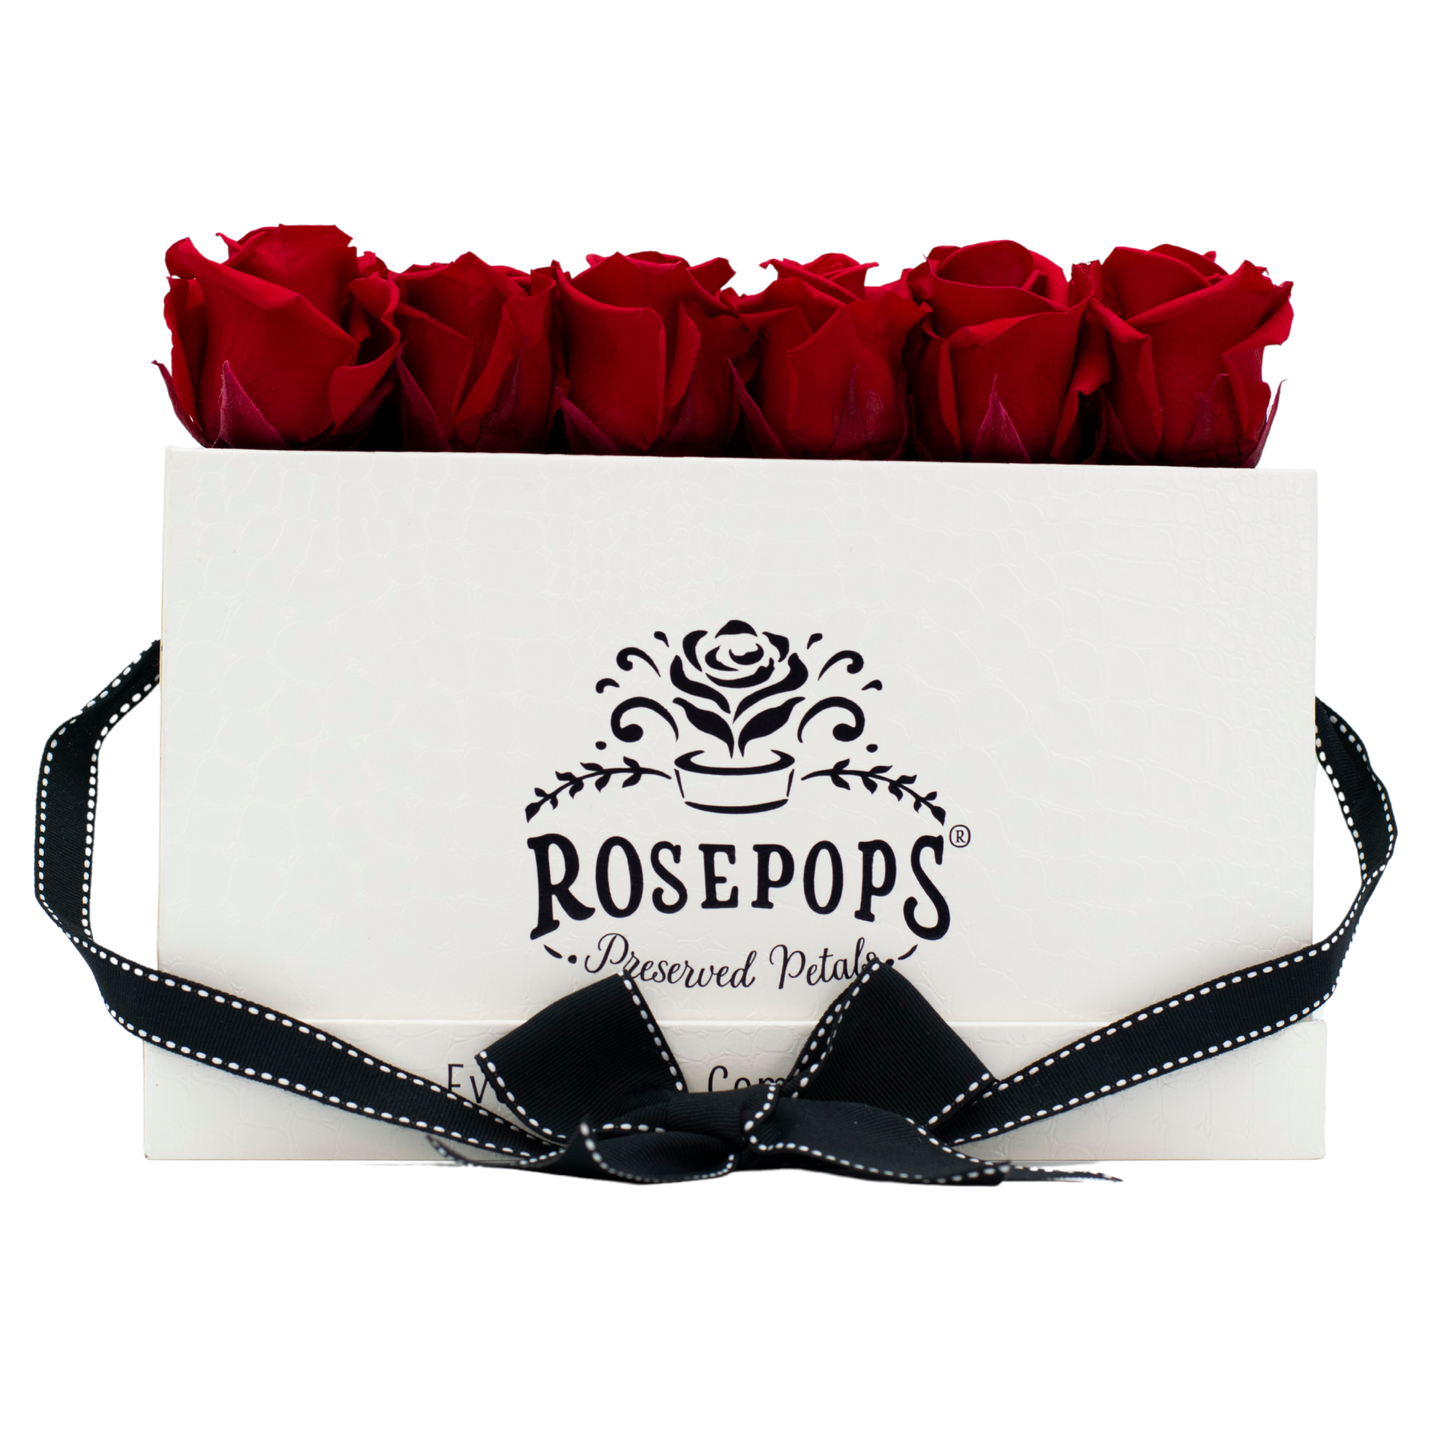 The White Monogrammed Pop of the Line - Cherry Crush Roses